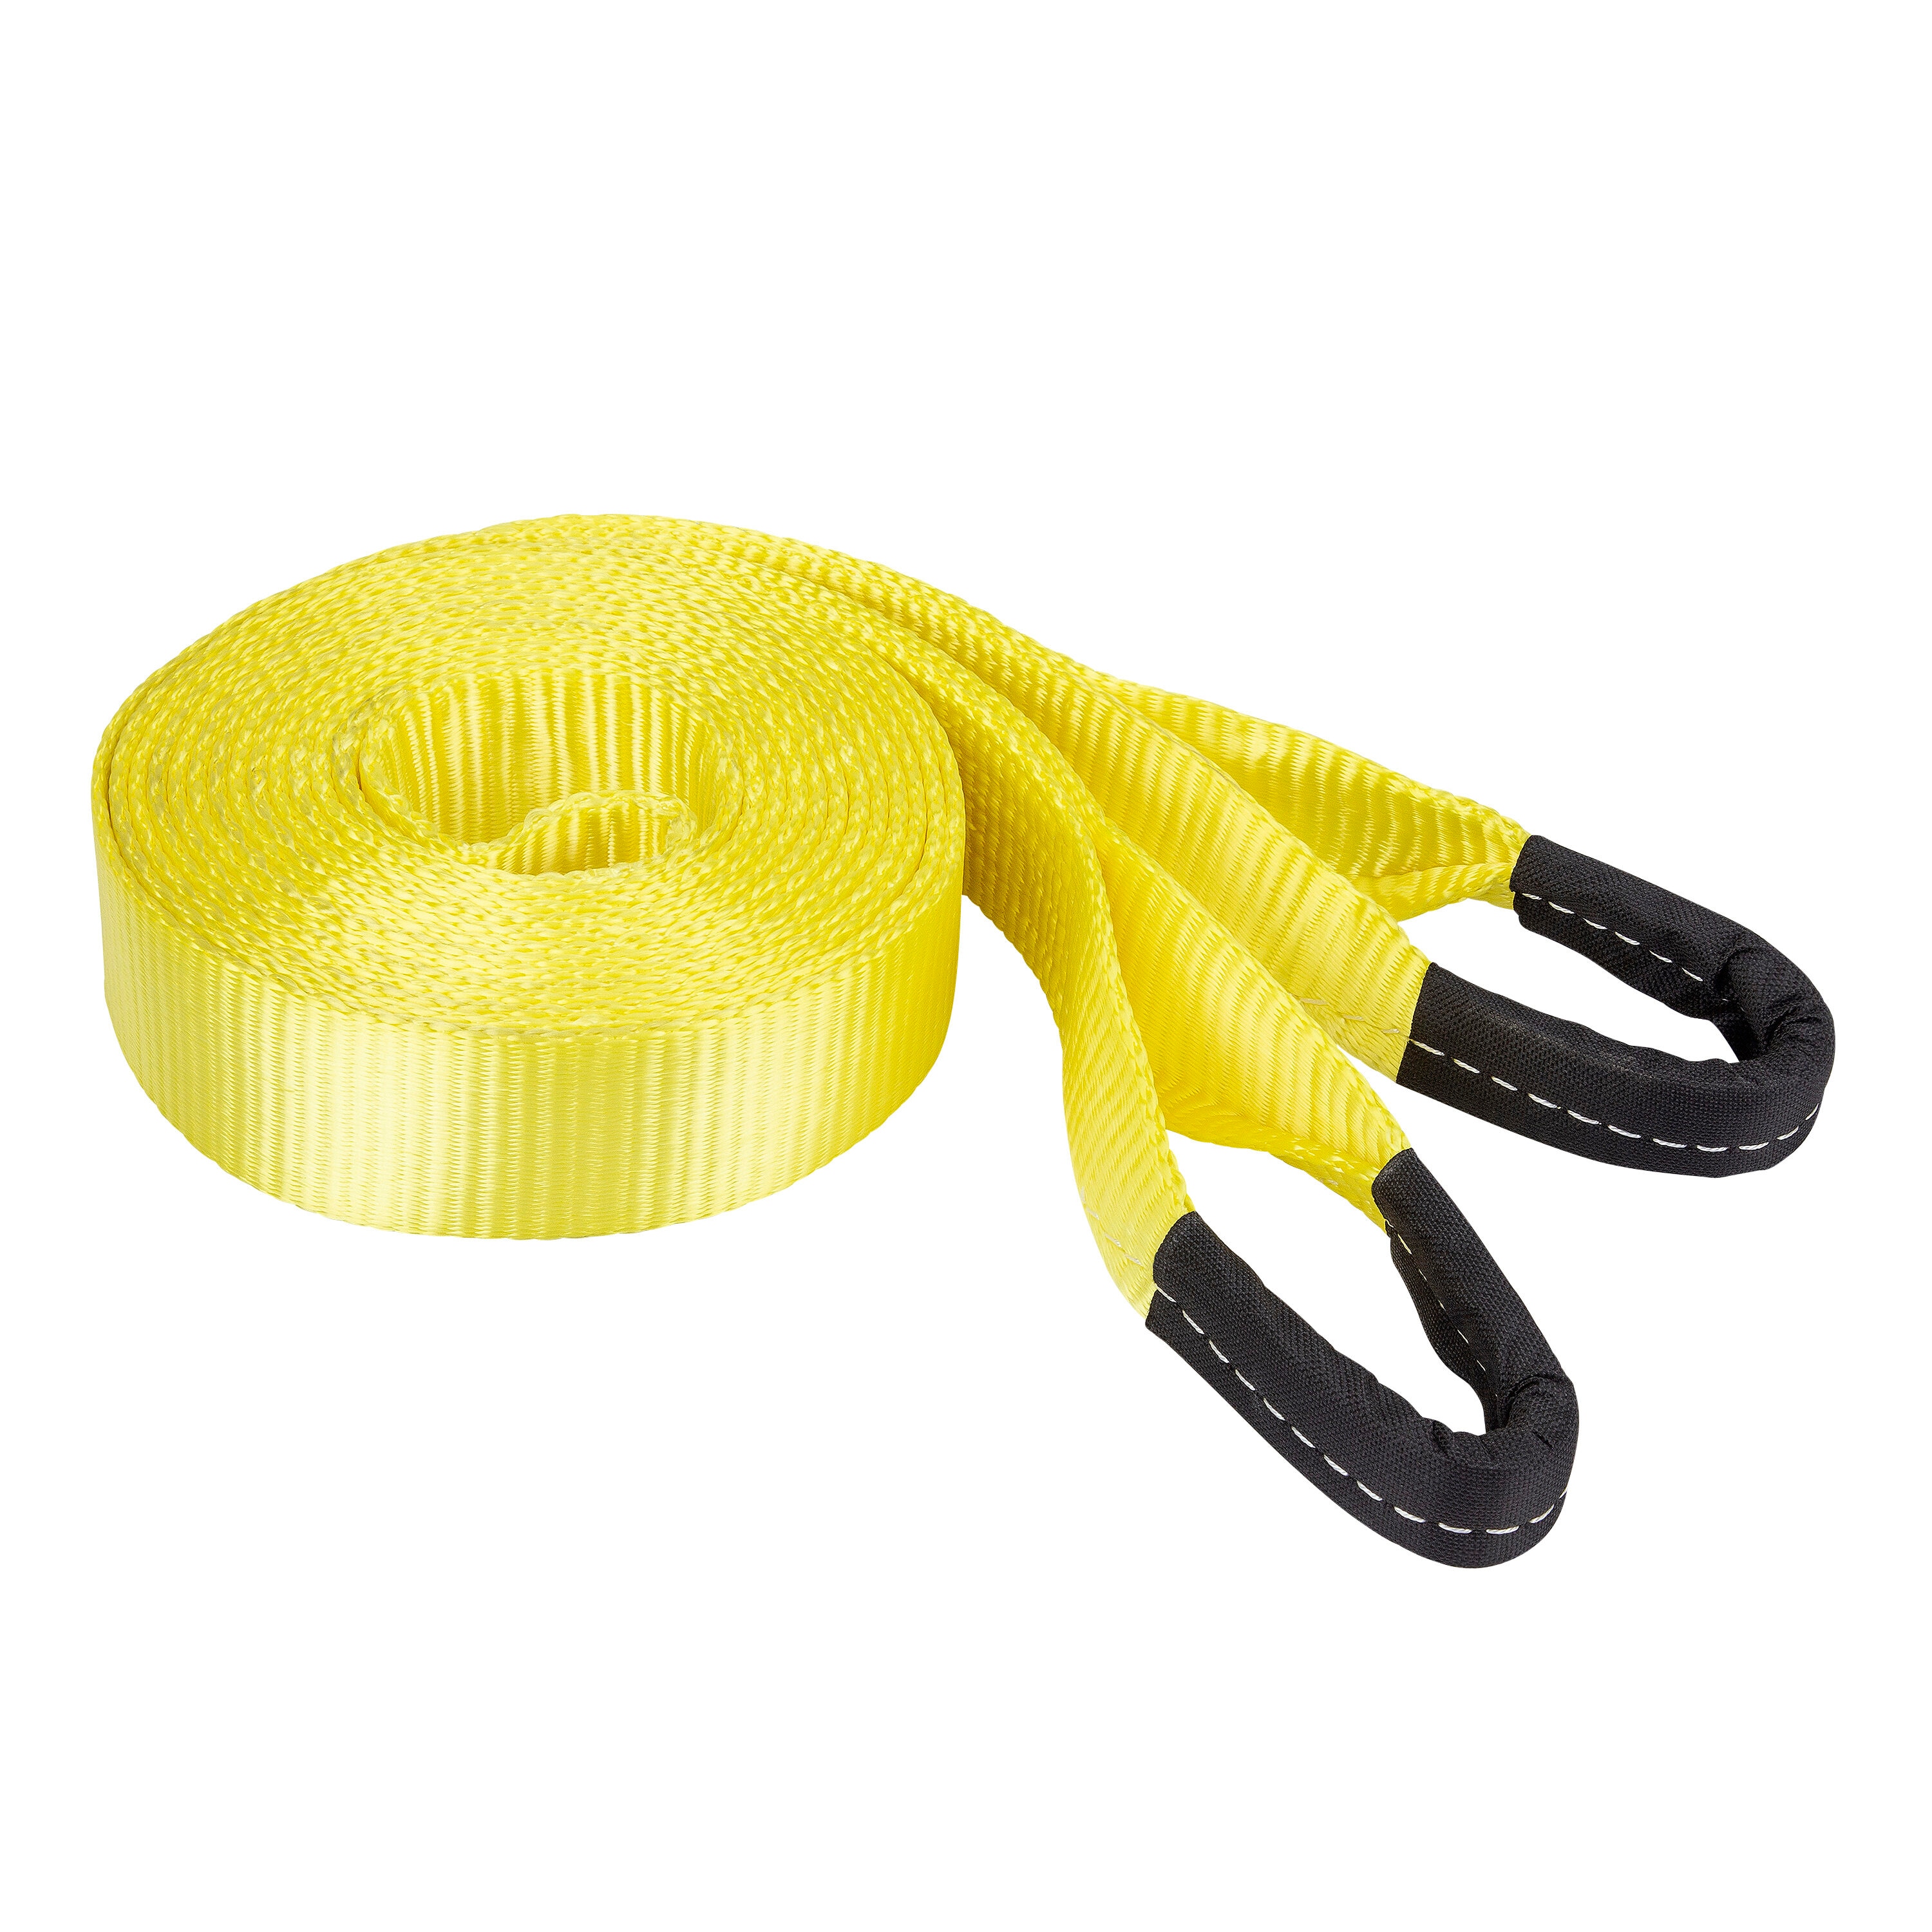 Tow Rope Heavy Duty 5/10/15/20 Ton,Flat,Nylon Trailer Tow Ropes,Car Tow  Rope Straps with Hooks,4/5/7/9 M Metre,Tow Line Belt,for Cars